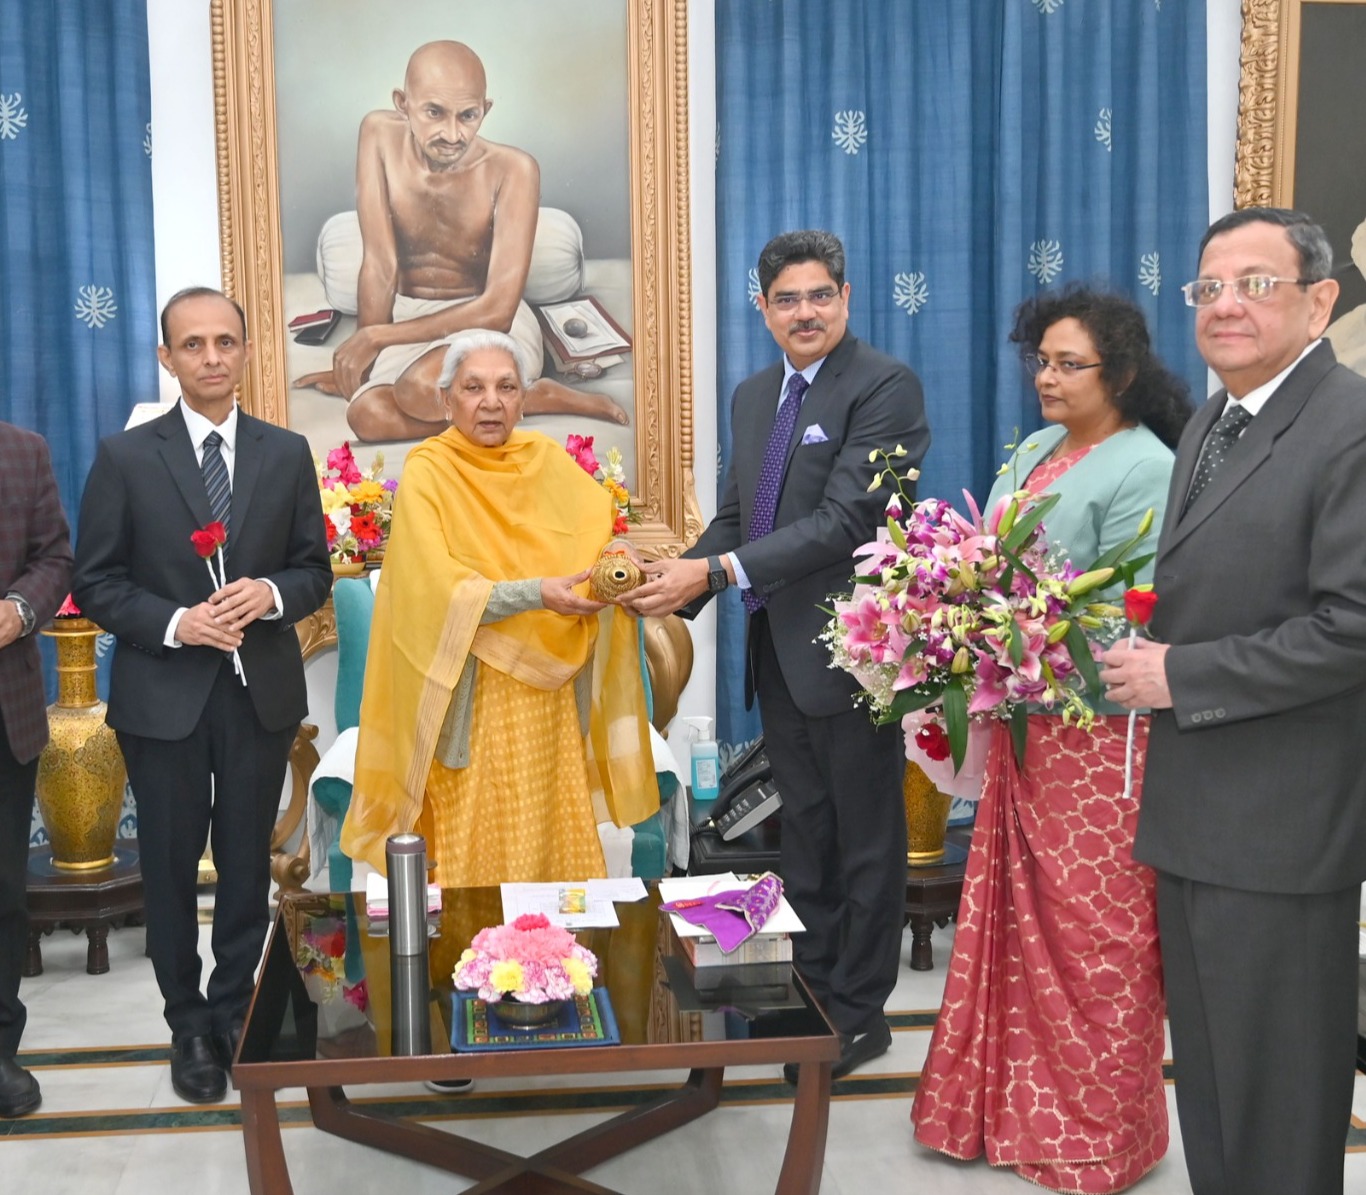 Vice Chancellor and professors of Lucknow University met the Governor and expressed gratitude on the approval of Rs 100 crore grant from PM Usha.